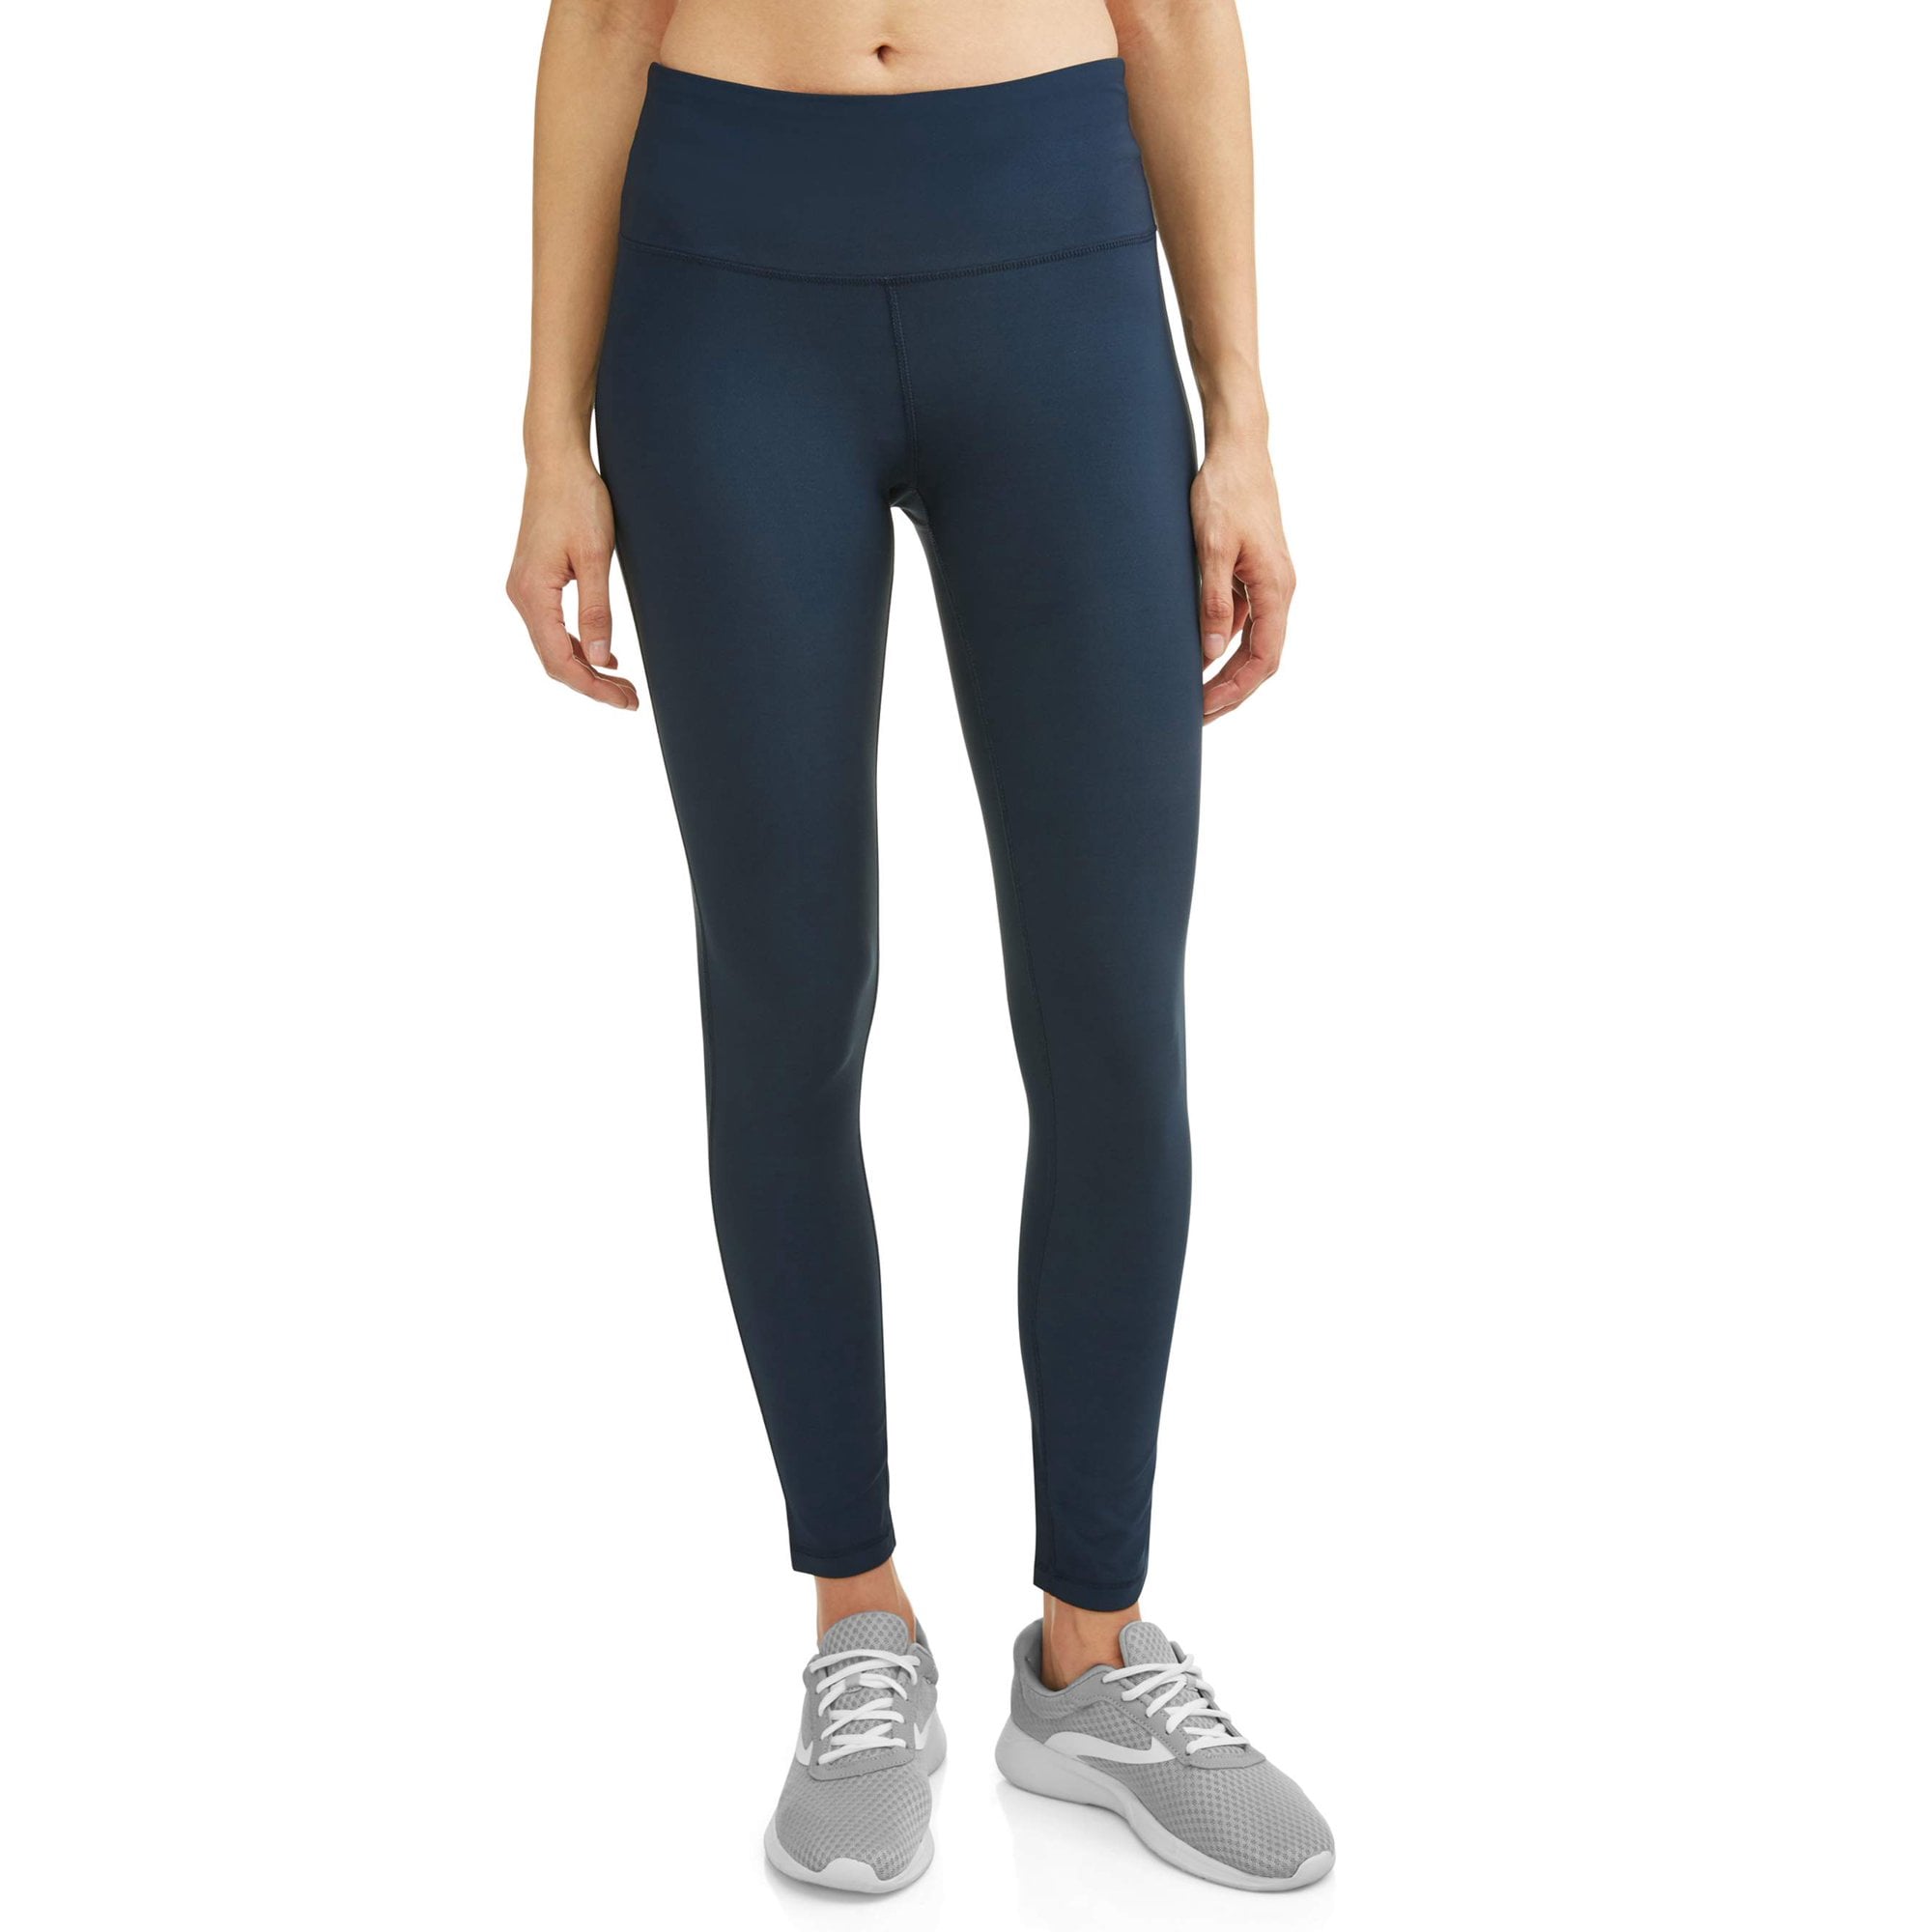 N.Y.L. Sport Active High Waist Tummy Control Performance Ankle